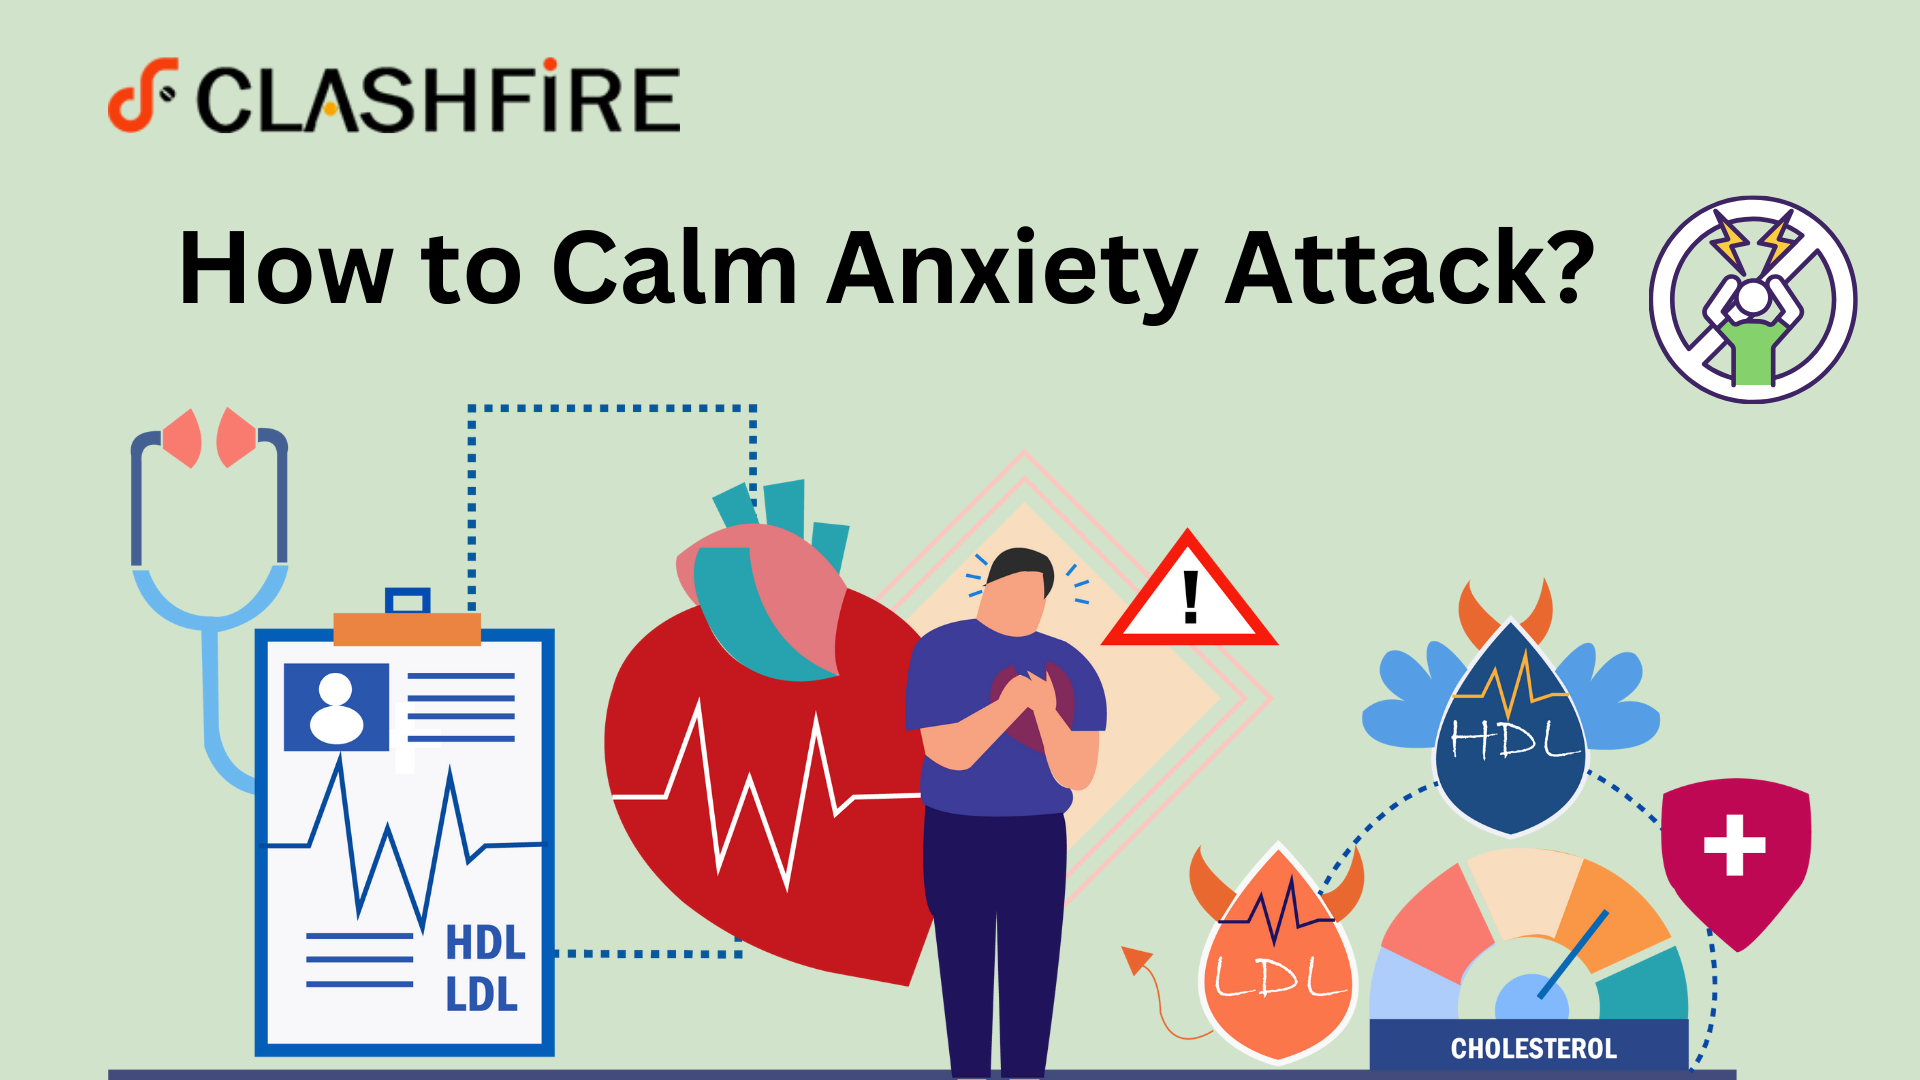 How to Calm Anxiety Attack?